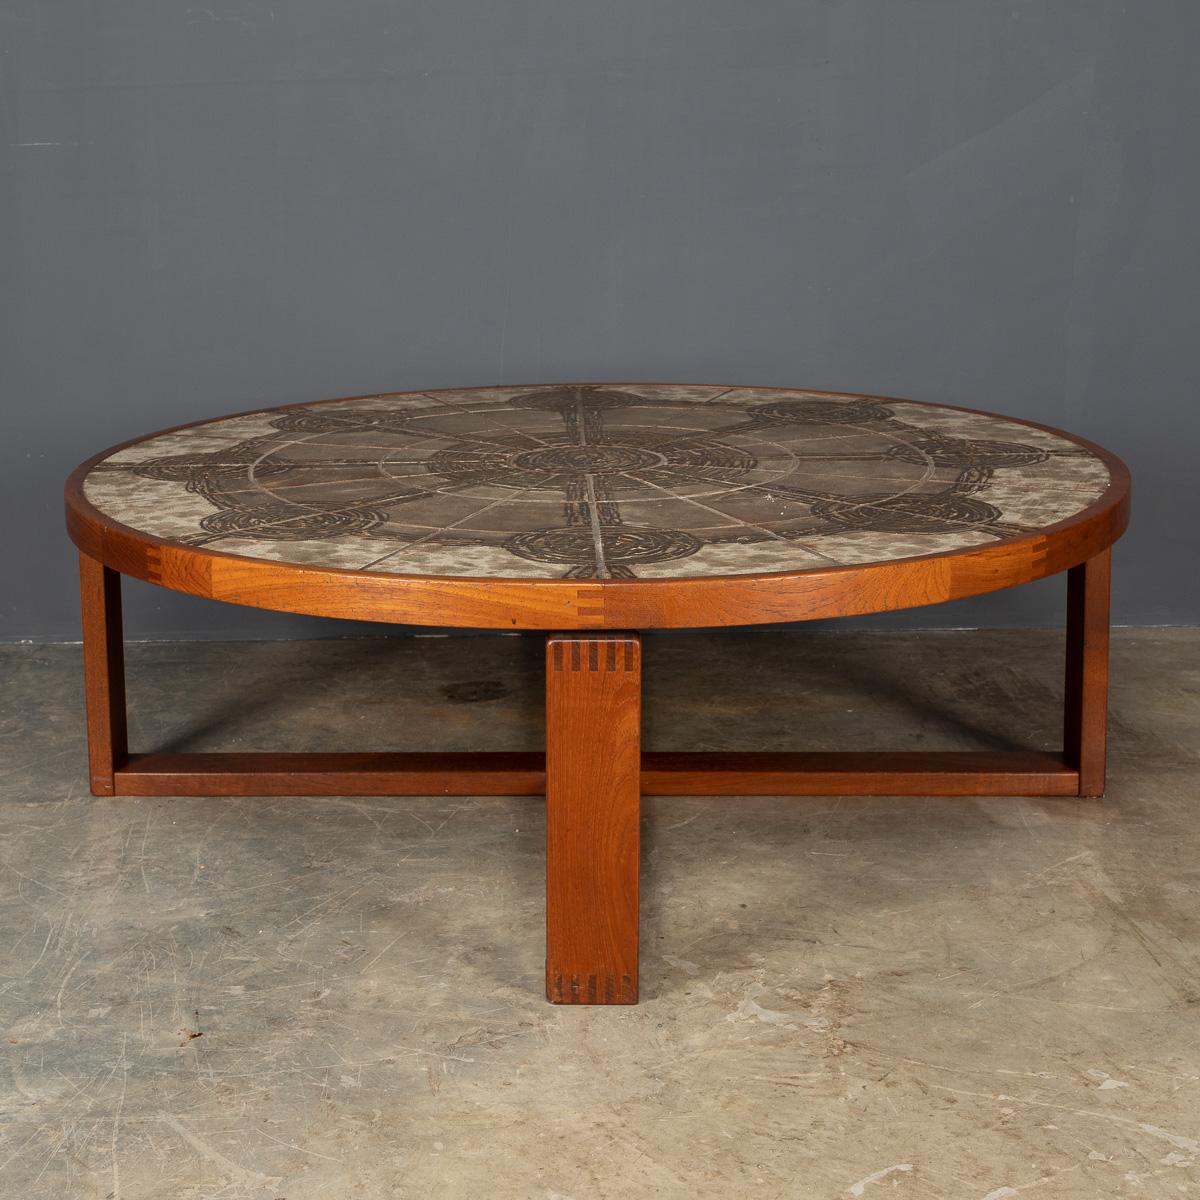 Stylish 20th century Danish Ox Art coffee table with teak frame and tiled top. Ox Art signature and date ‘74, produced by Danish company Trioh.

Condition
In great condition - wear consistent with age.

Size
Height: 42cm
Diameter: 125cm.